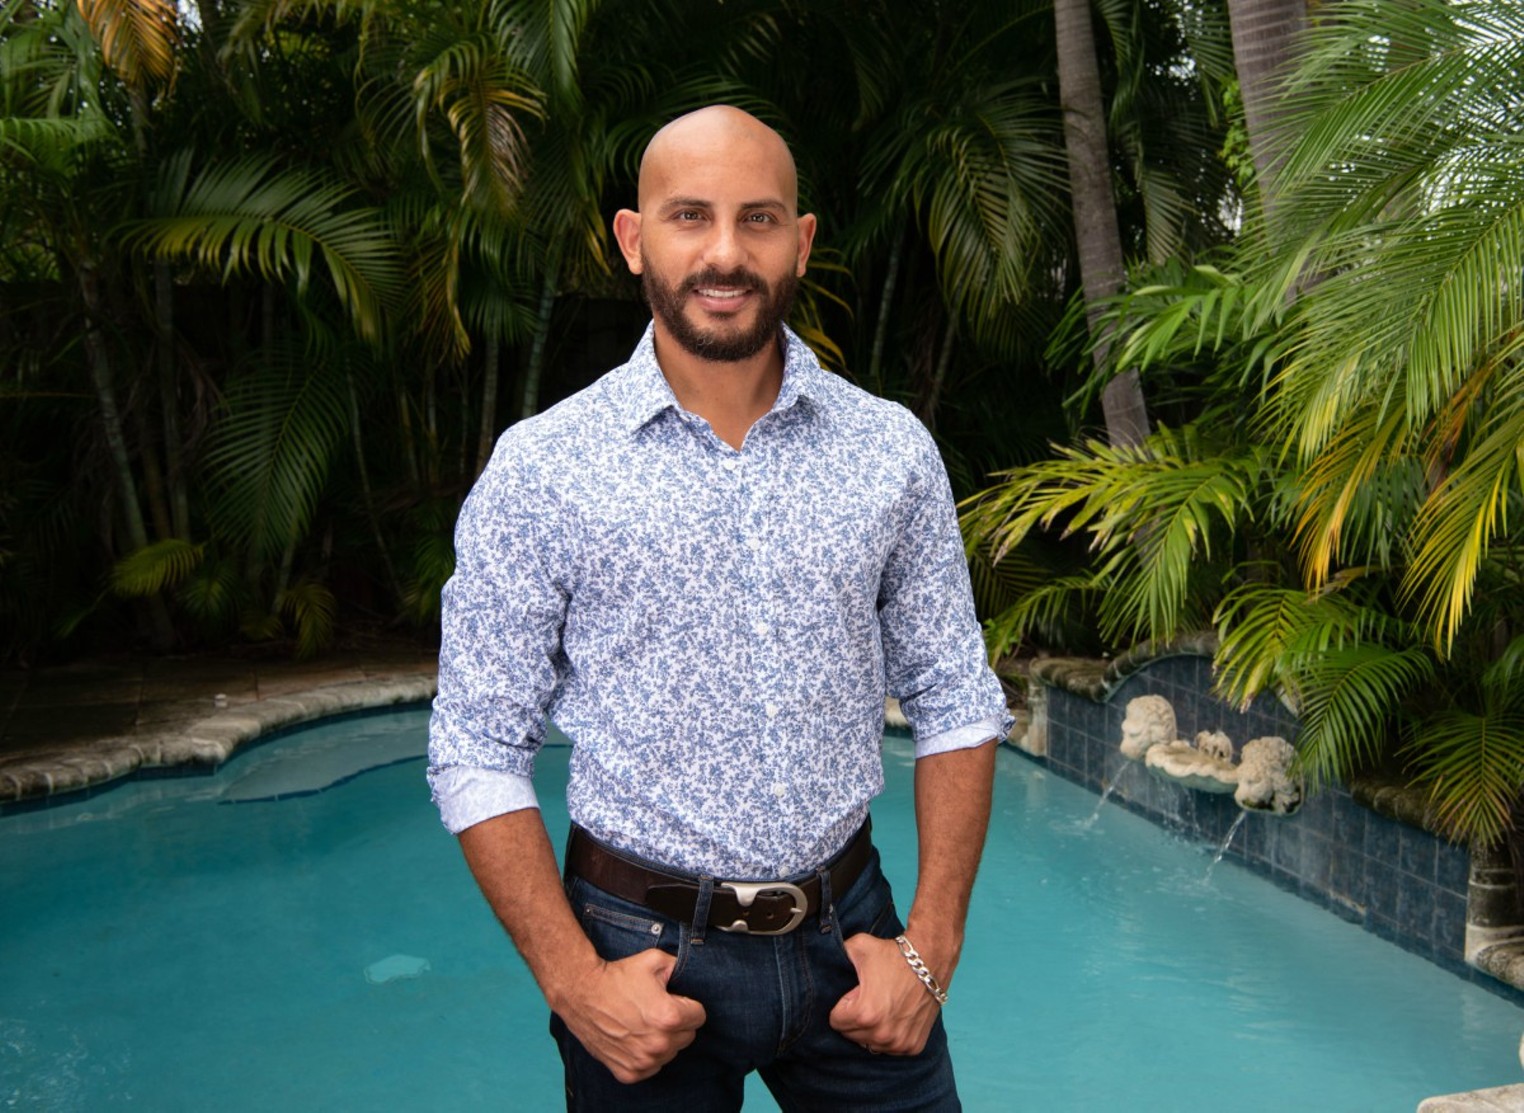 Fort Lauderdale Gay Porn - Porn Star Juan Melecio Runs for Wilton Manors City Commission | Miami New  Times